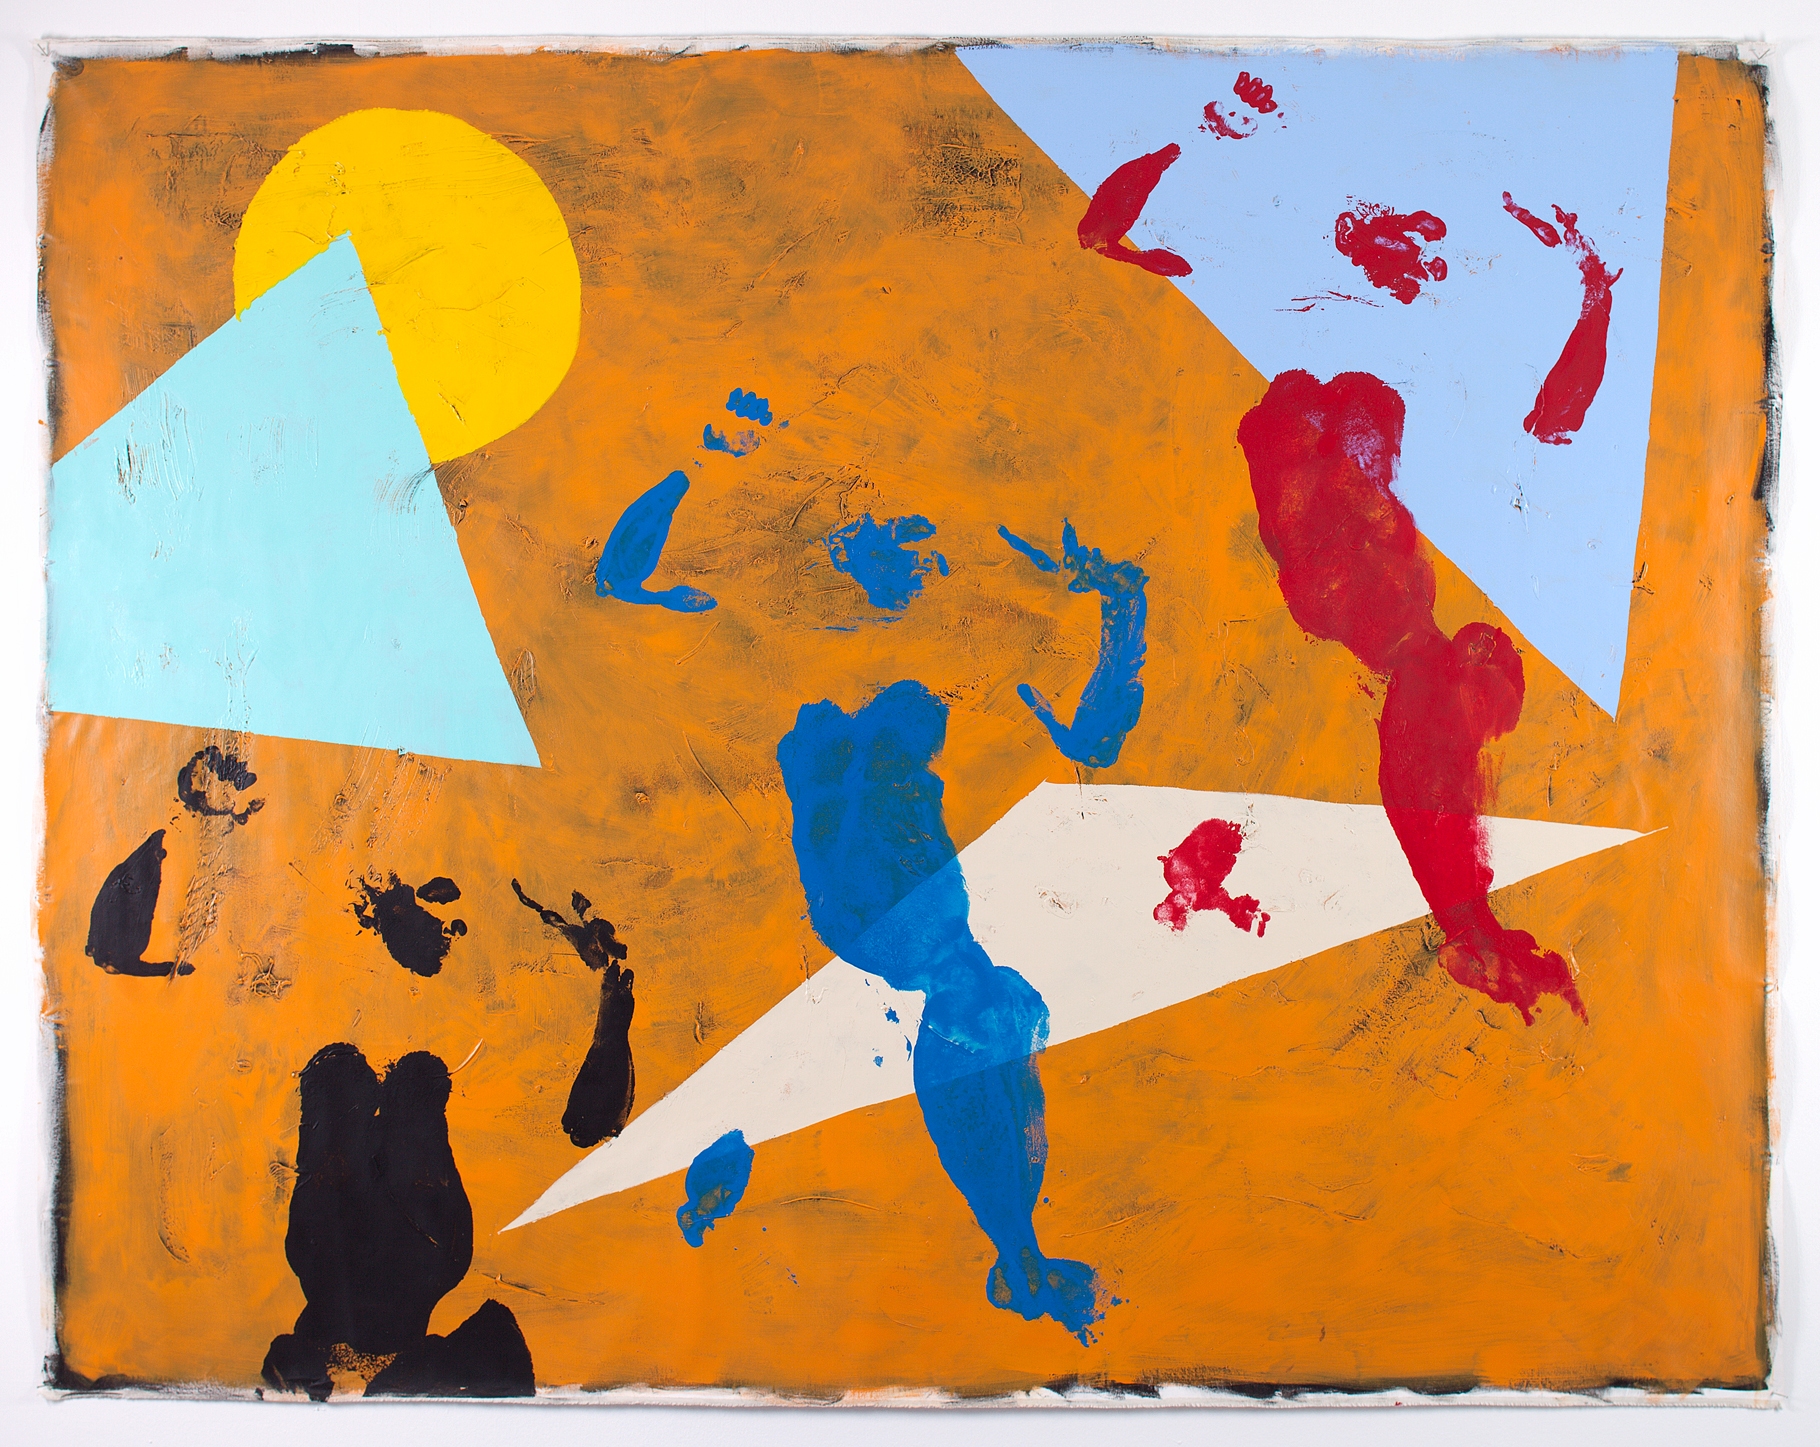 René Luckhardt, 3 figures dancing (day), 2013, human monotype painting, synthetic polymer acrylics on canvas, 215 x 300 cm